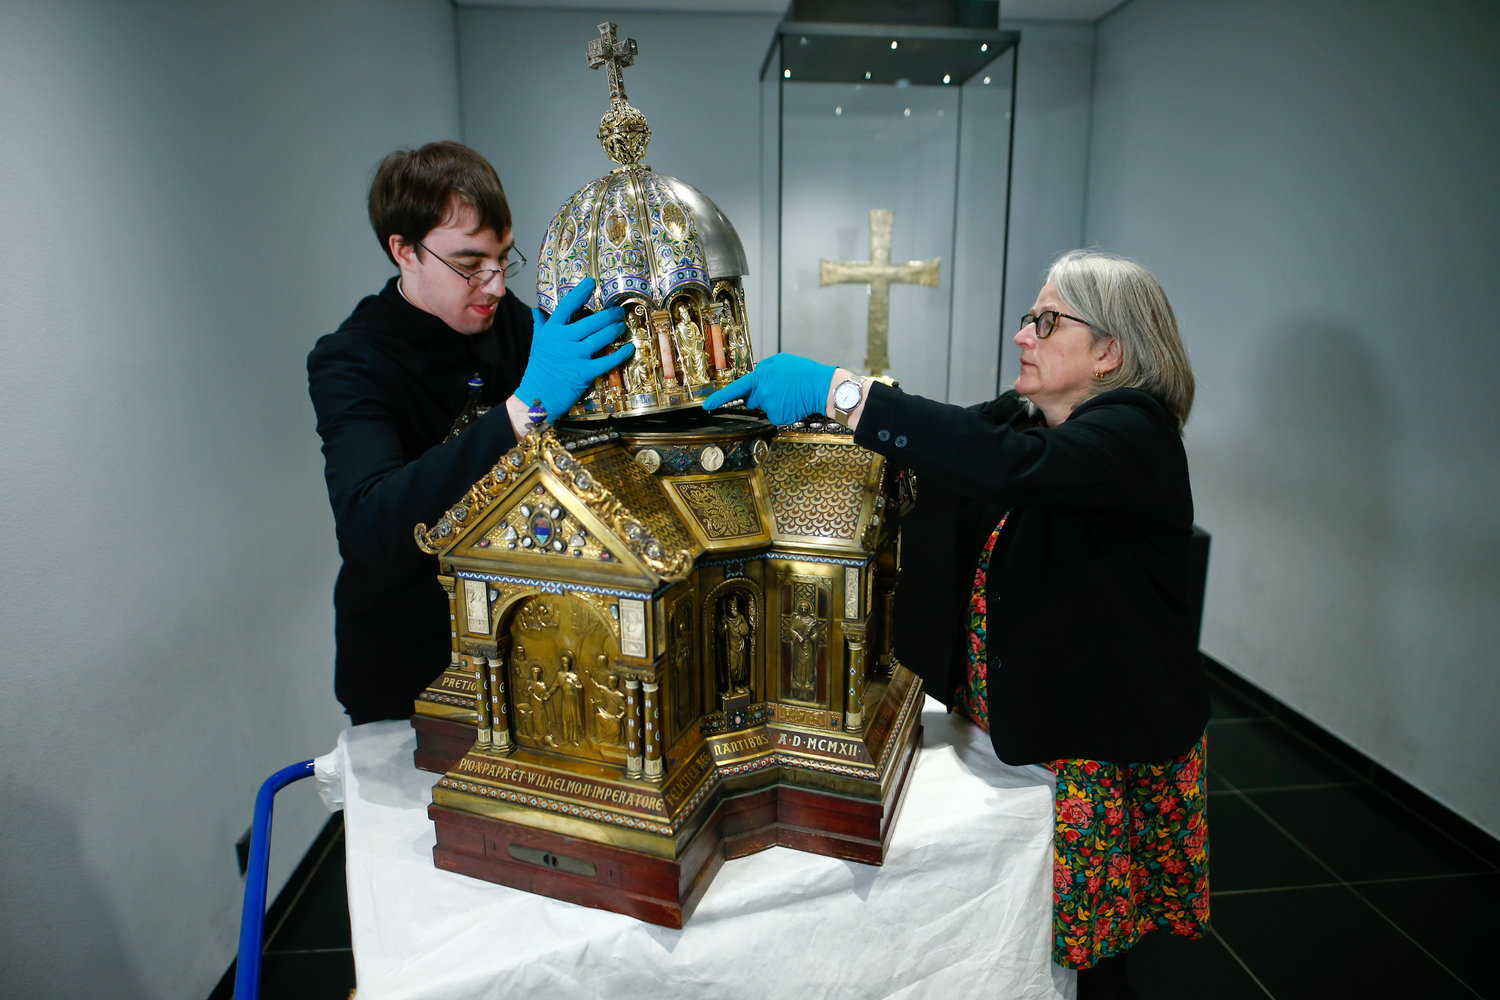 Restorer Luke Jonathan Koeppe and Birgitta Falk, an official of the cathedral in Aachen, Germany, assemble the shrine with the relics of St. Corona March 25, 2020.